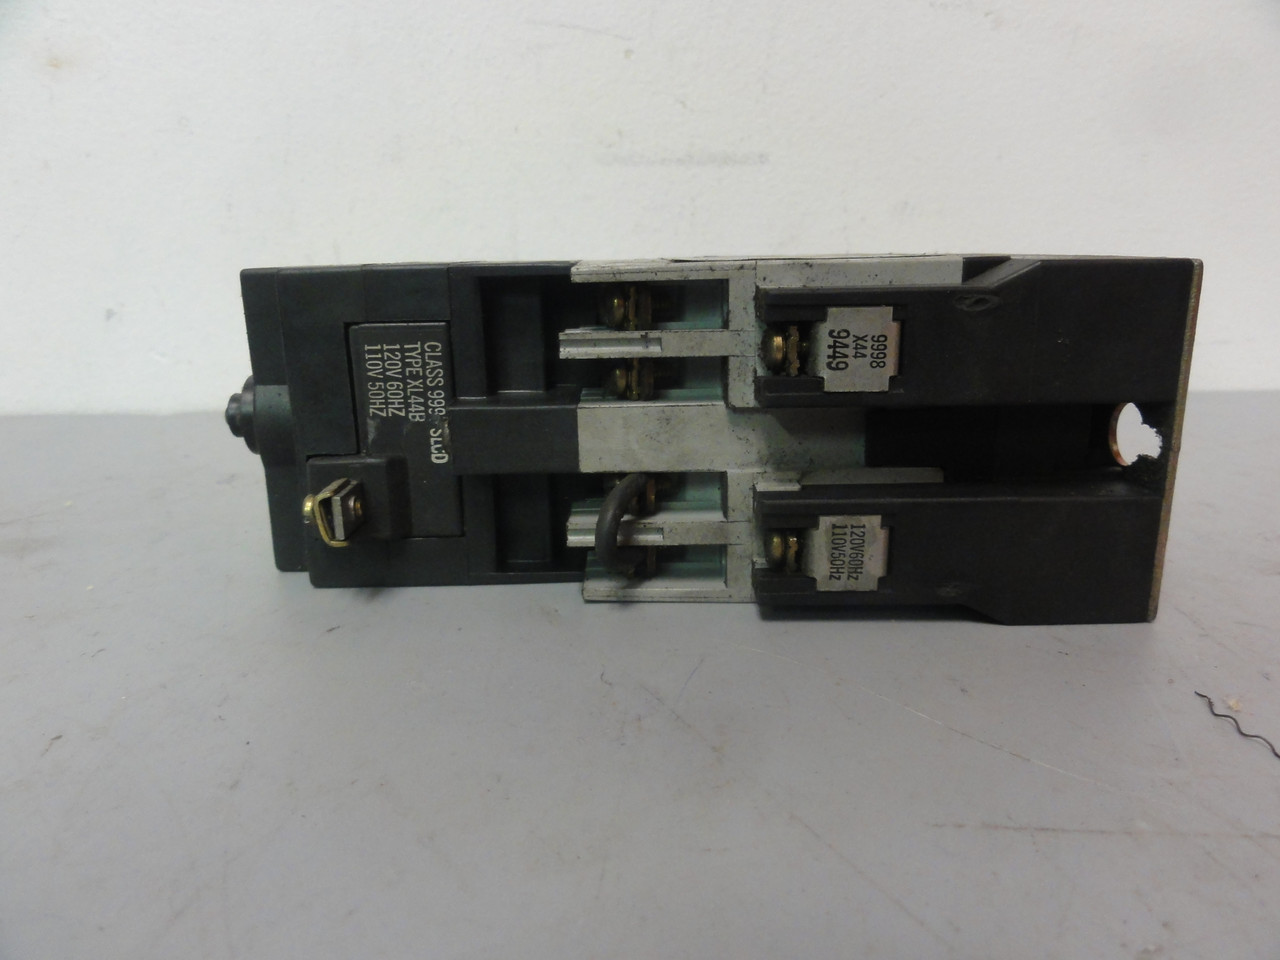 Square D Control Relay Class 8501 Type X0 40 Series A